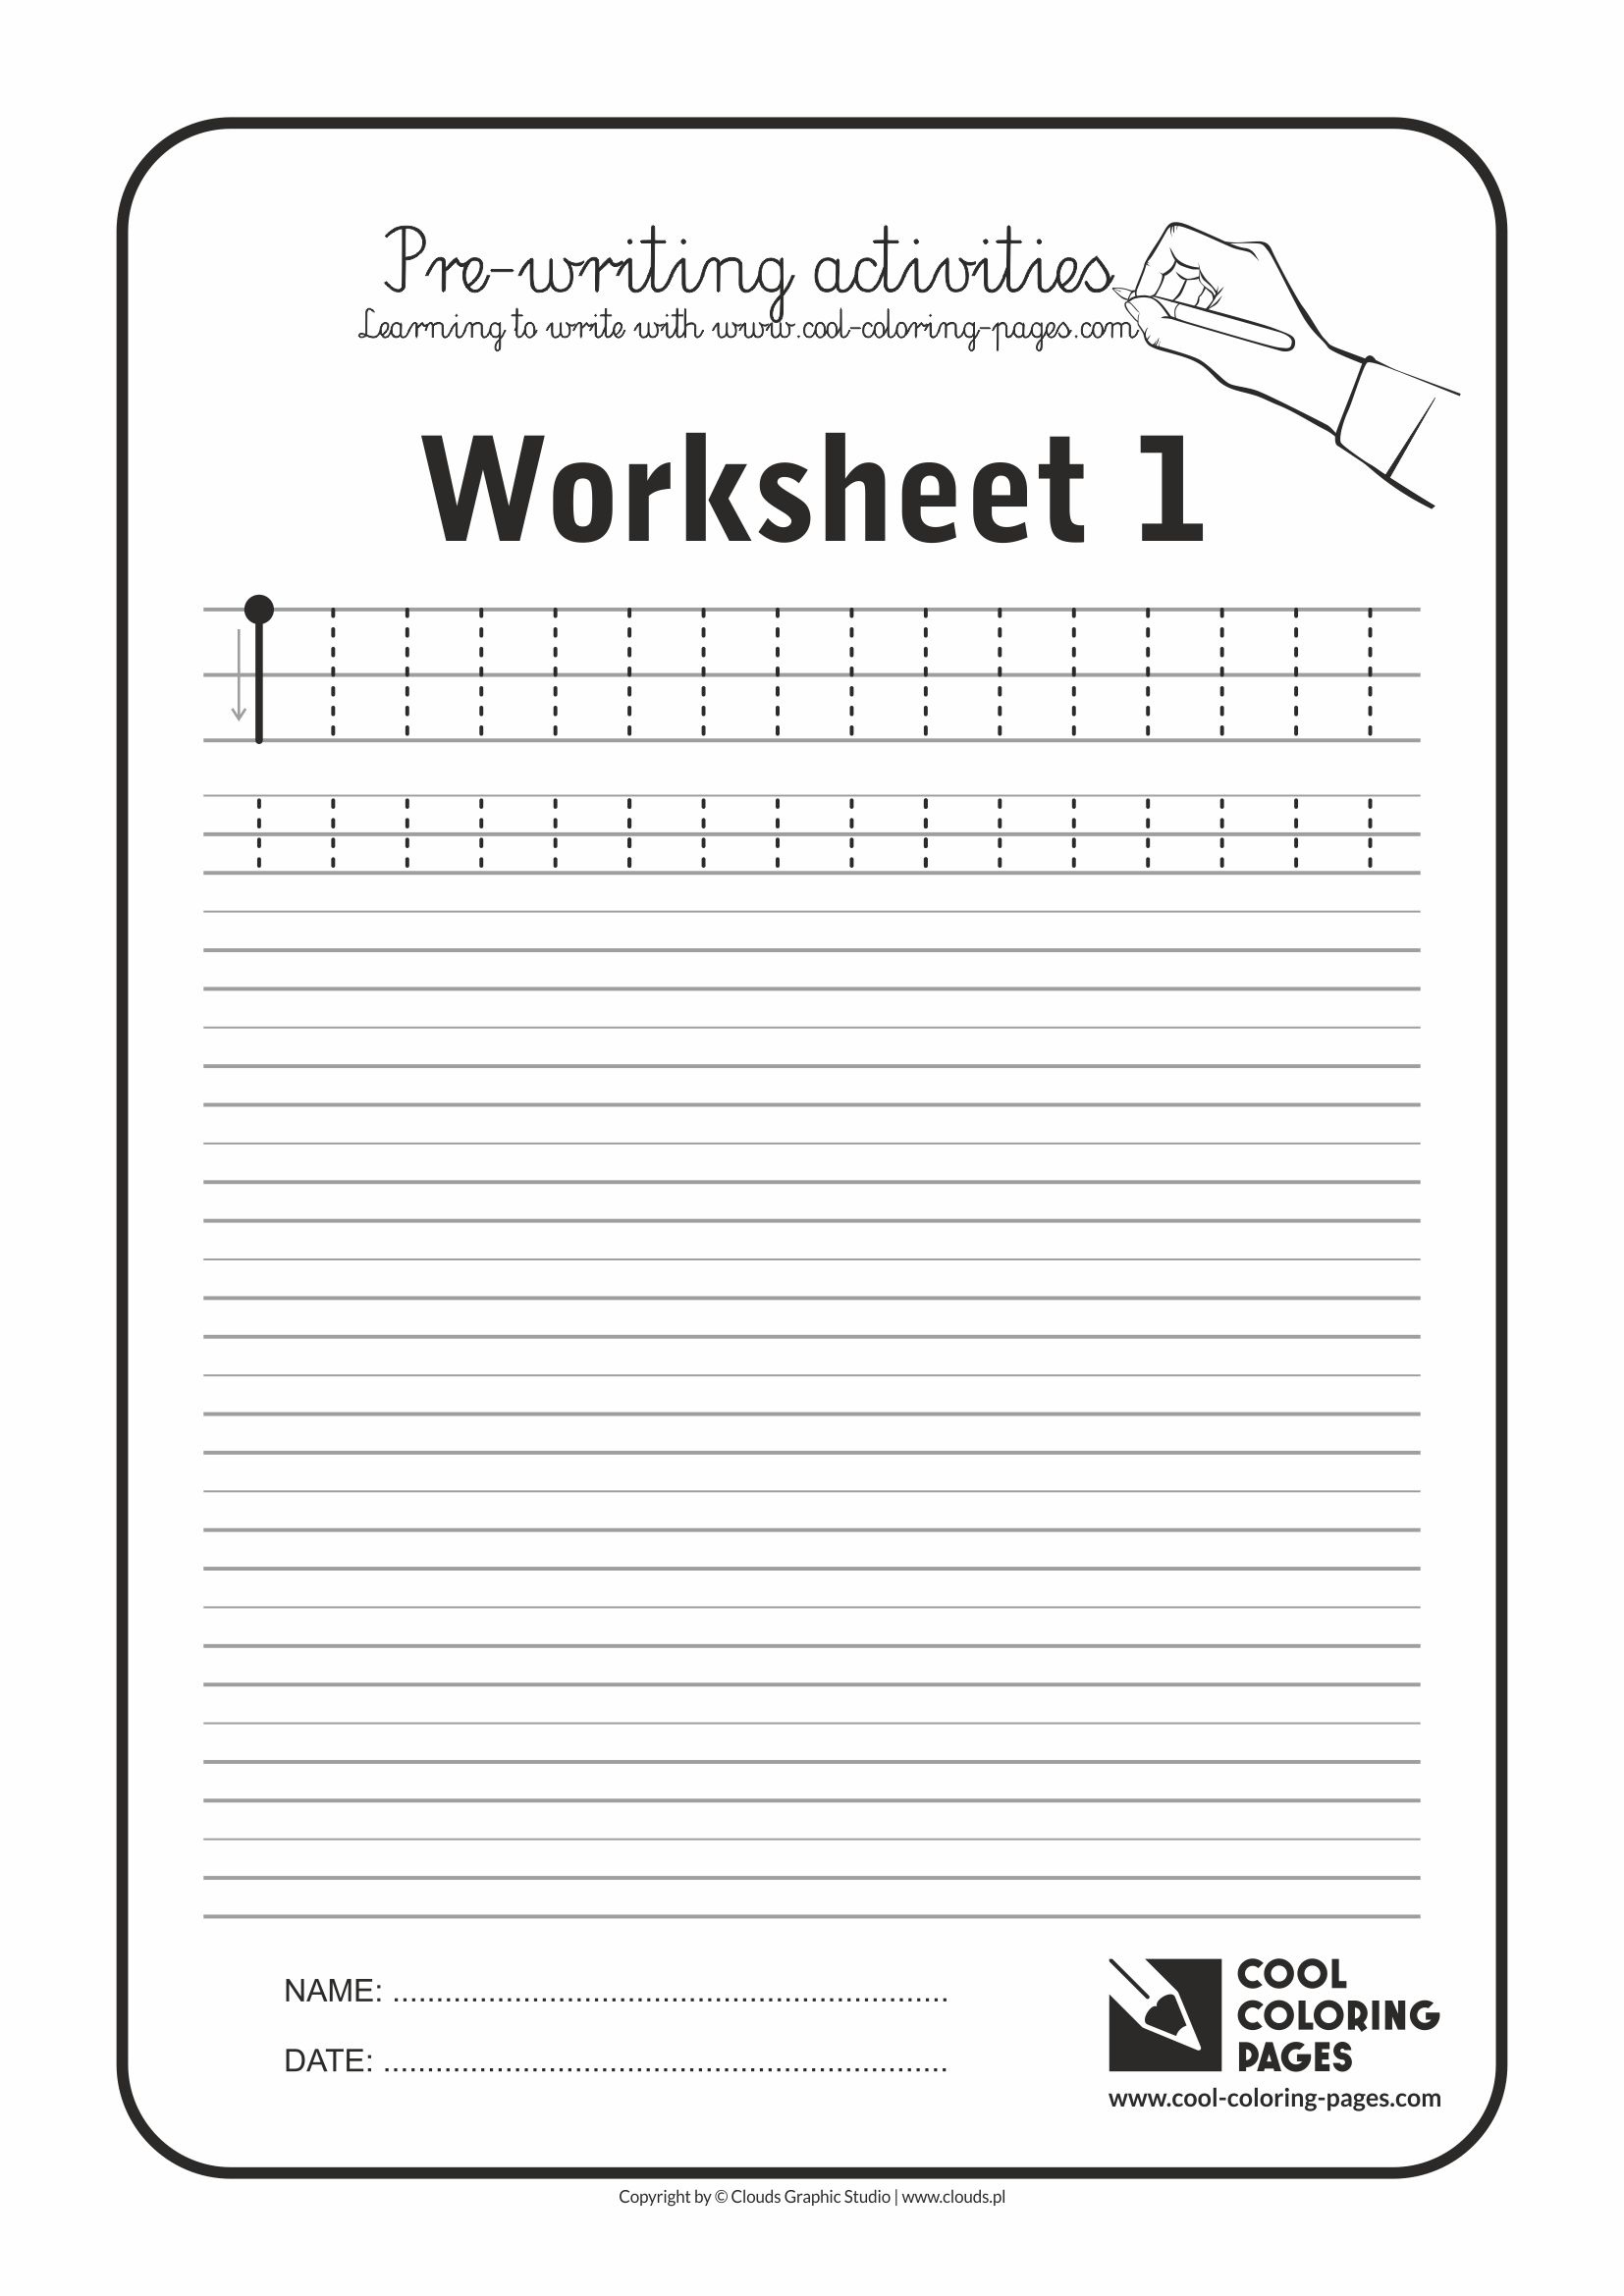 Cool Coloring Pages / Pre-writing activities / Worksheet no.1